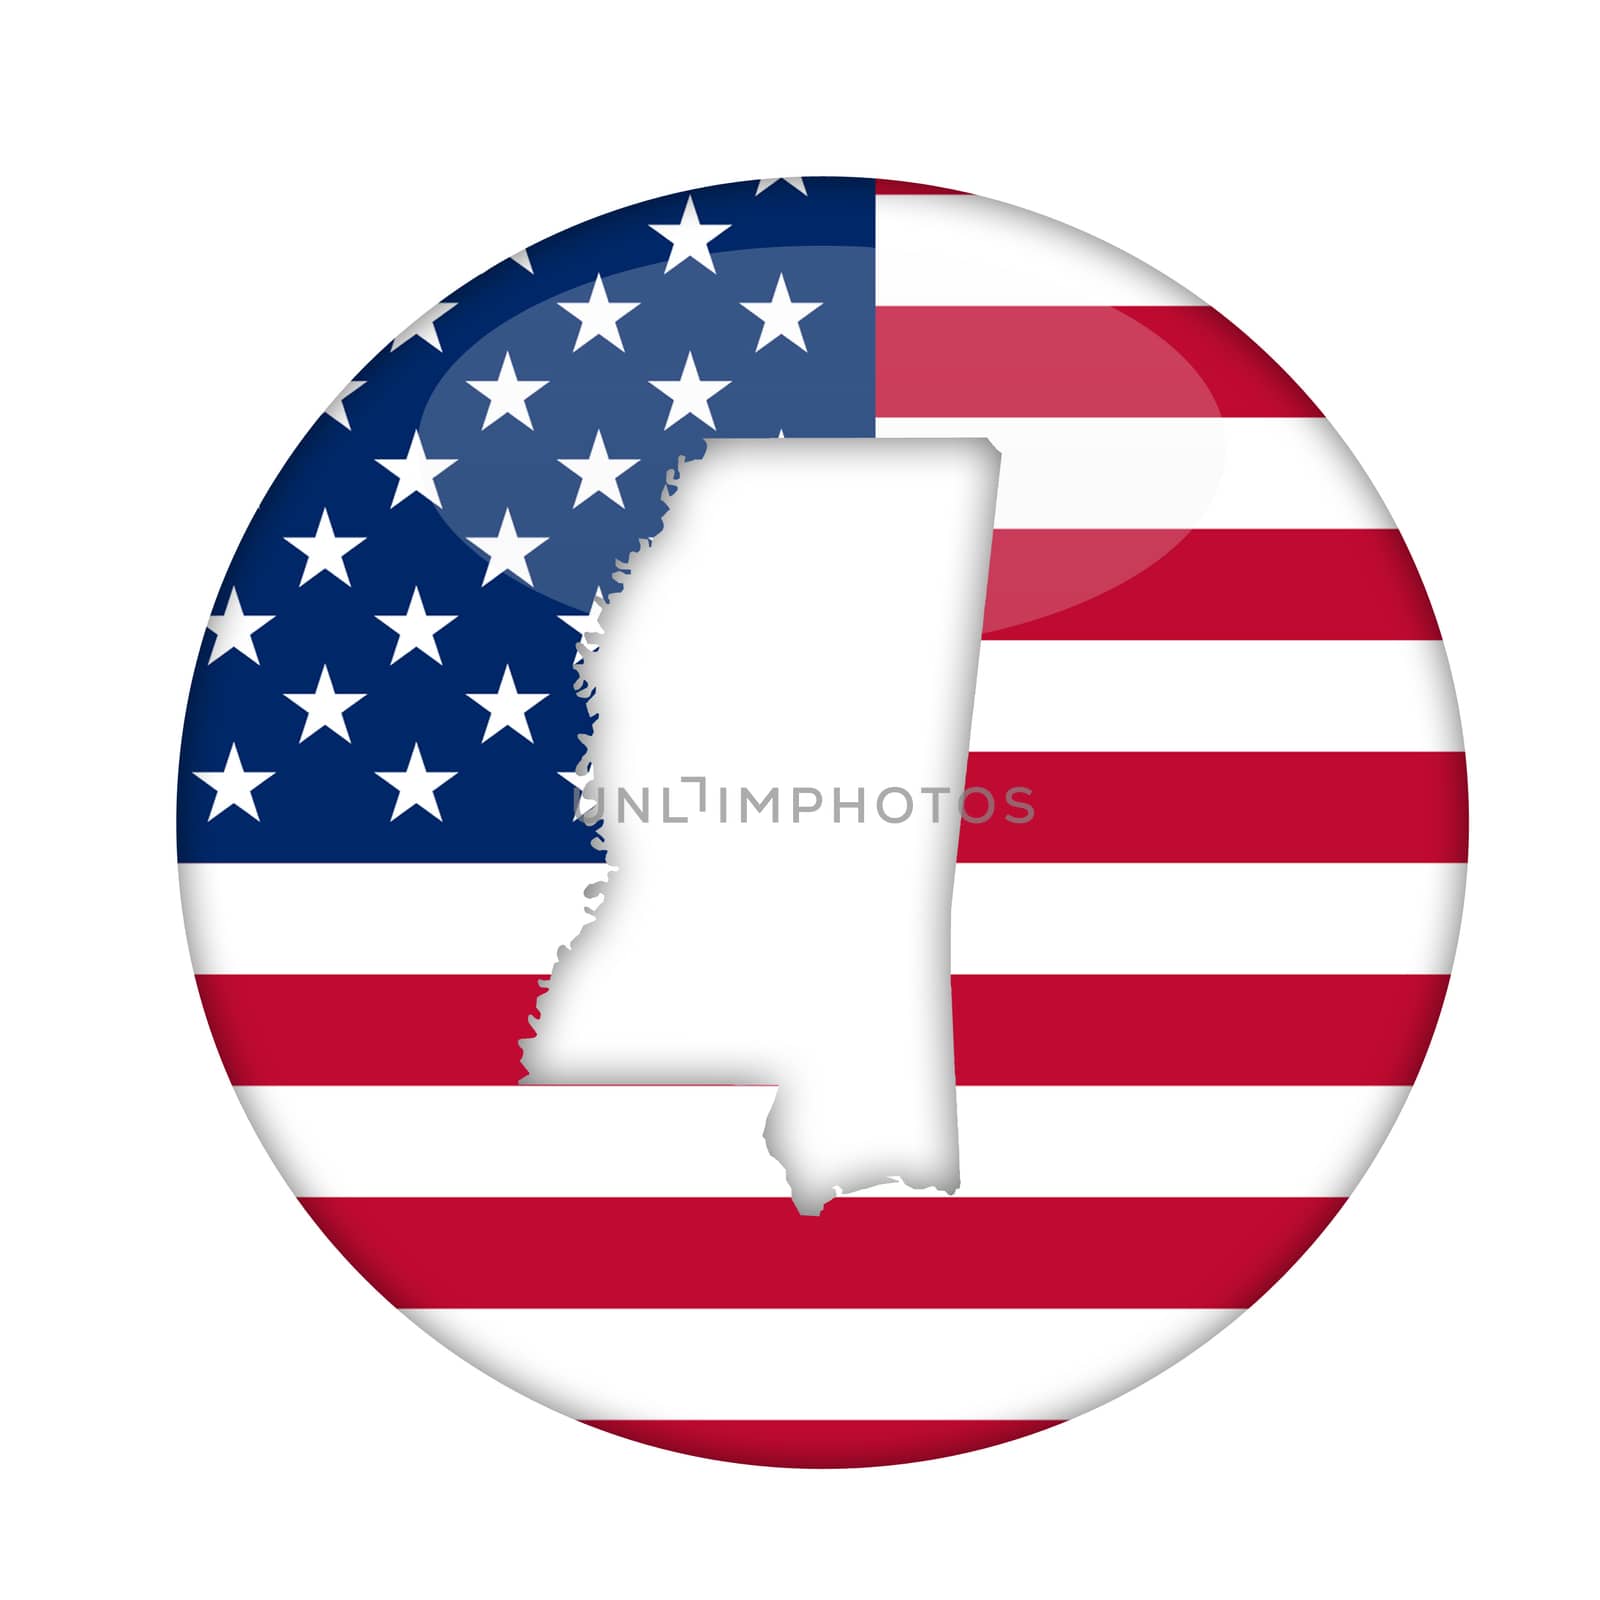 Mississippi state of America badge by speedfighter